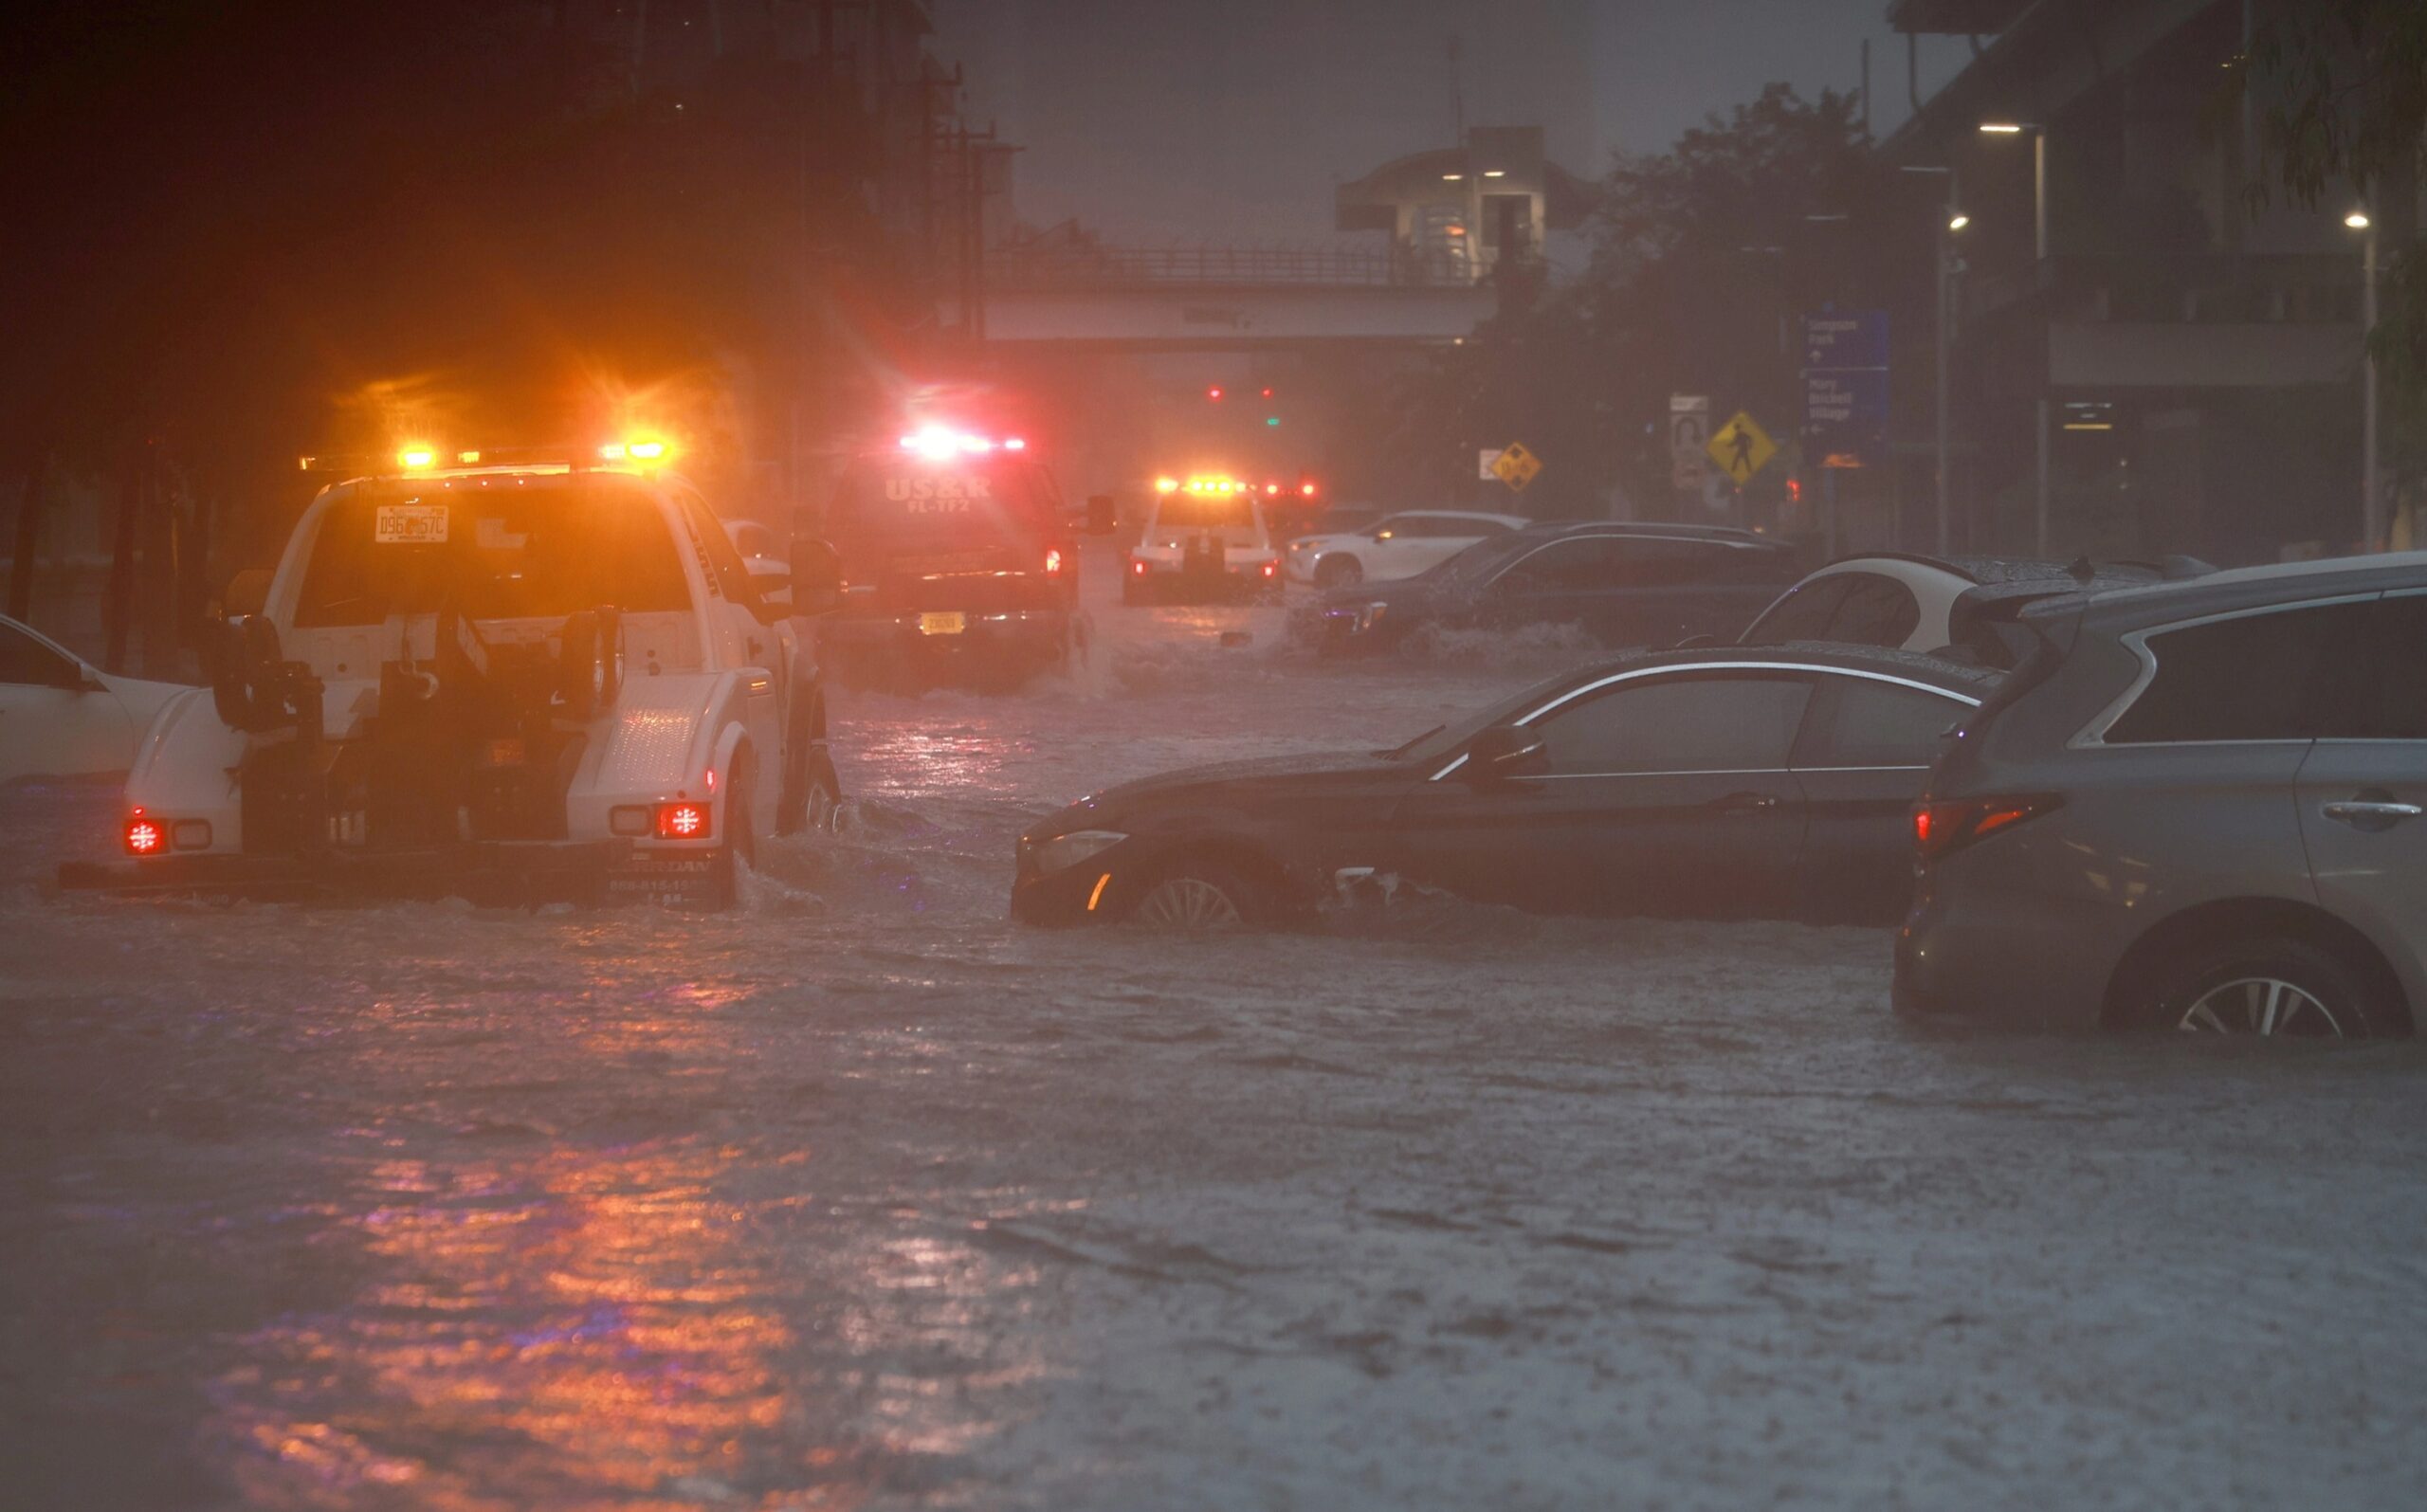 Shock images show Miami flooding and cars floating in up to 12 inches of water as city is